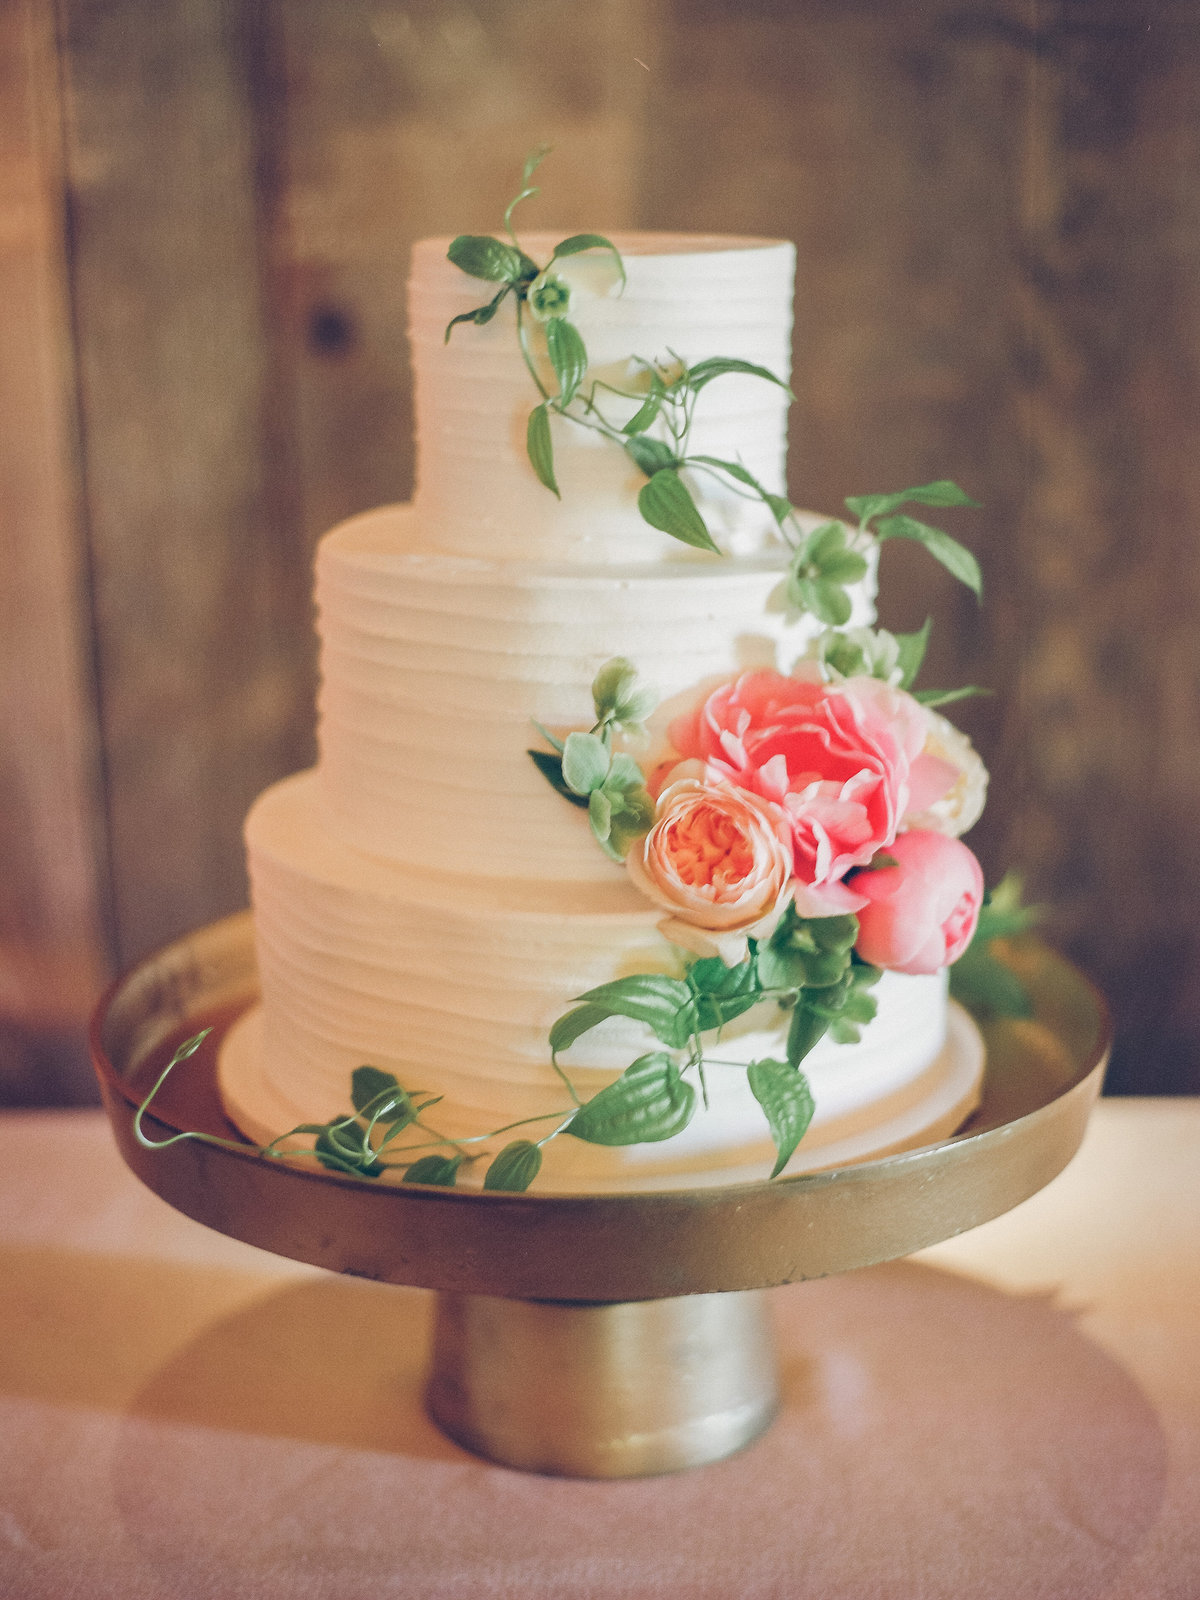 Cake for wedding by Jenny Schneider Events at Olympia's Valley Estate in Petaluma, California. Photo by Lori Paladino Photography.